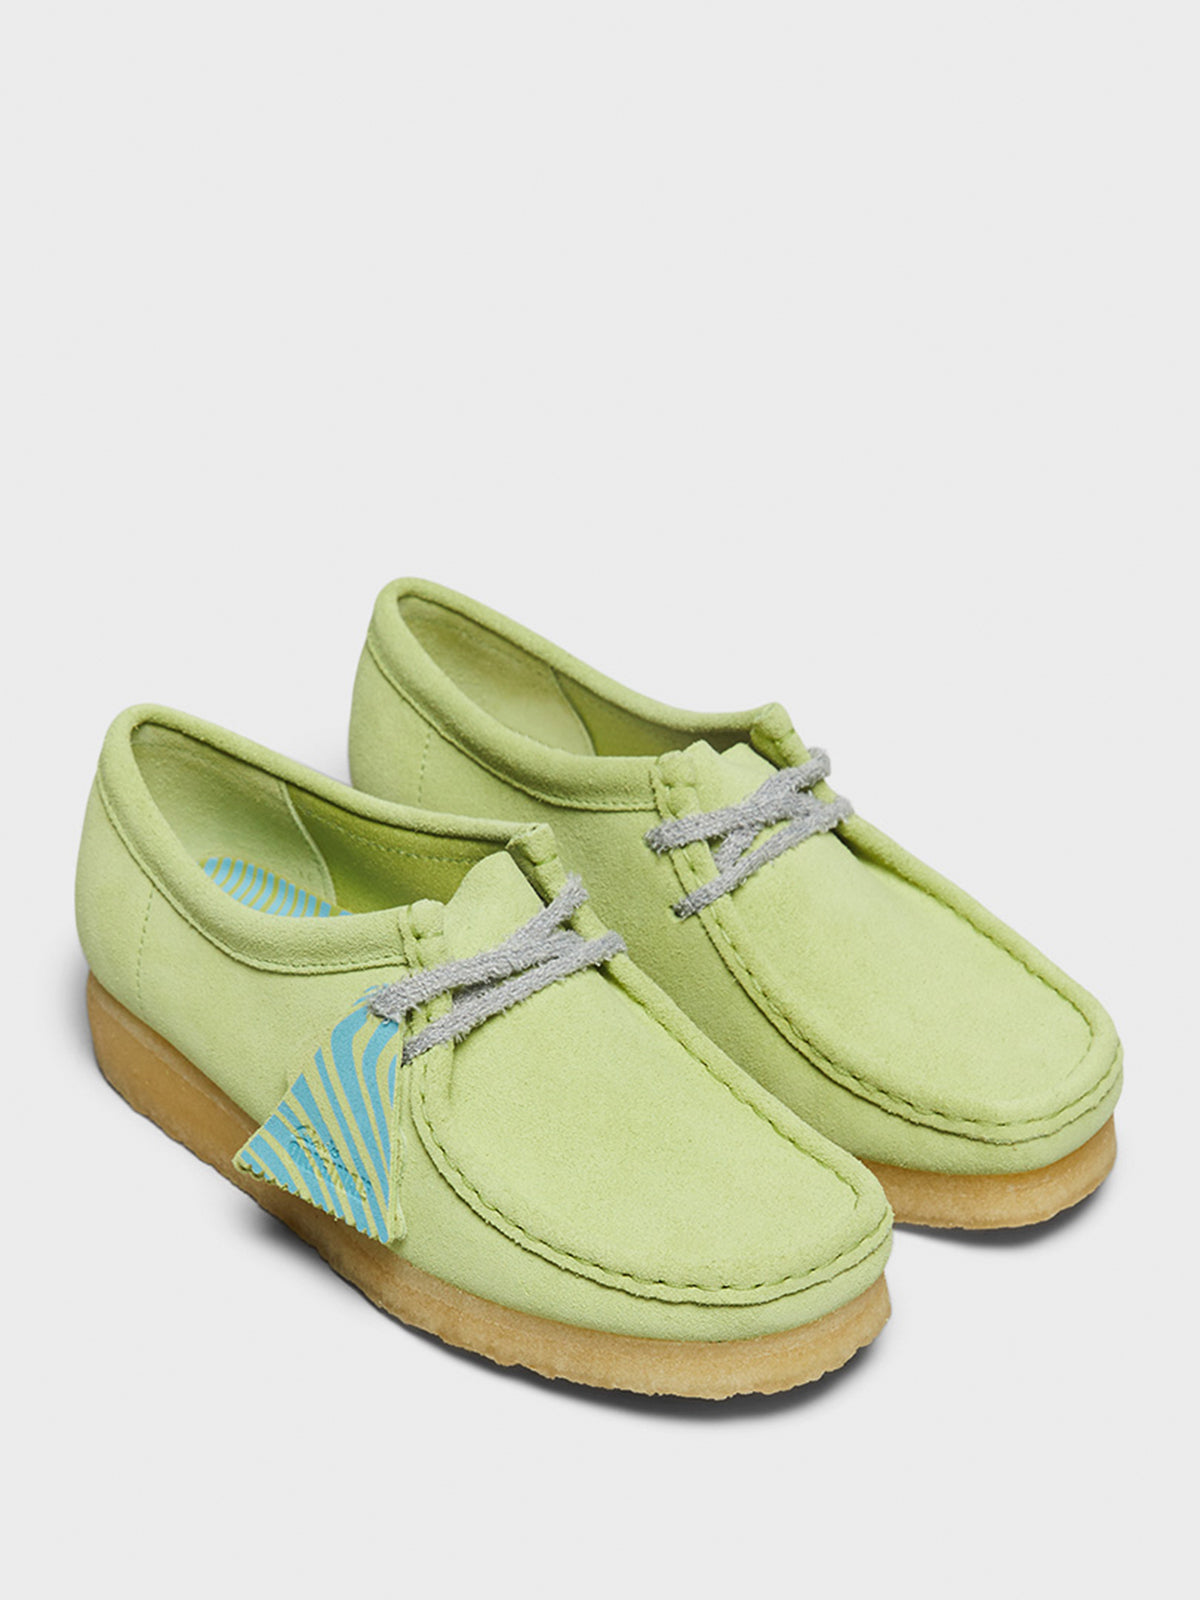 Women's Wallabee Shoes in Pale Lime Suede